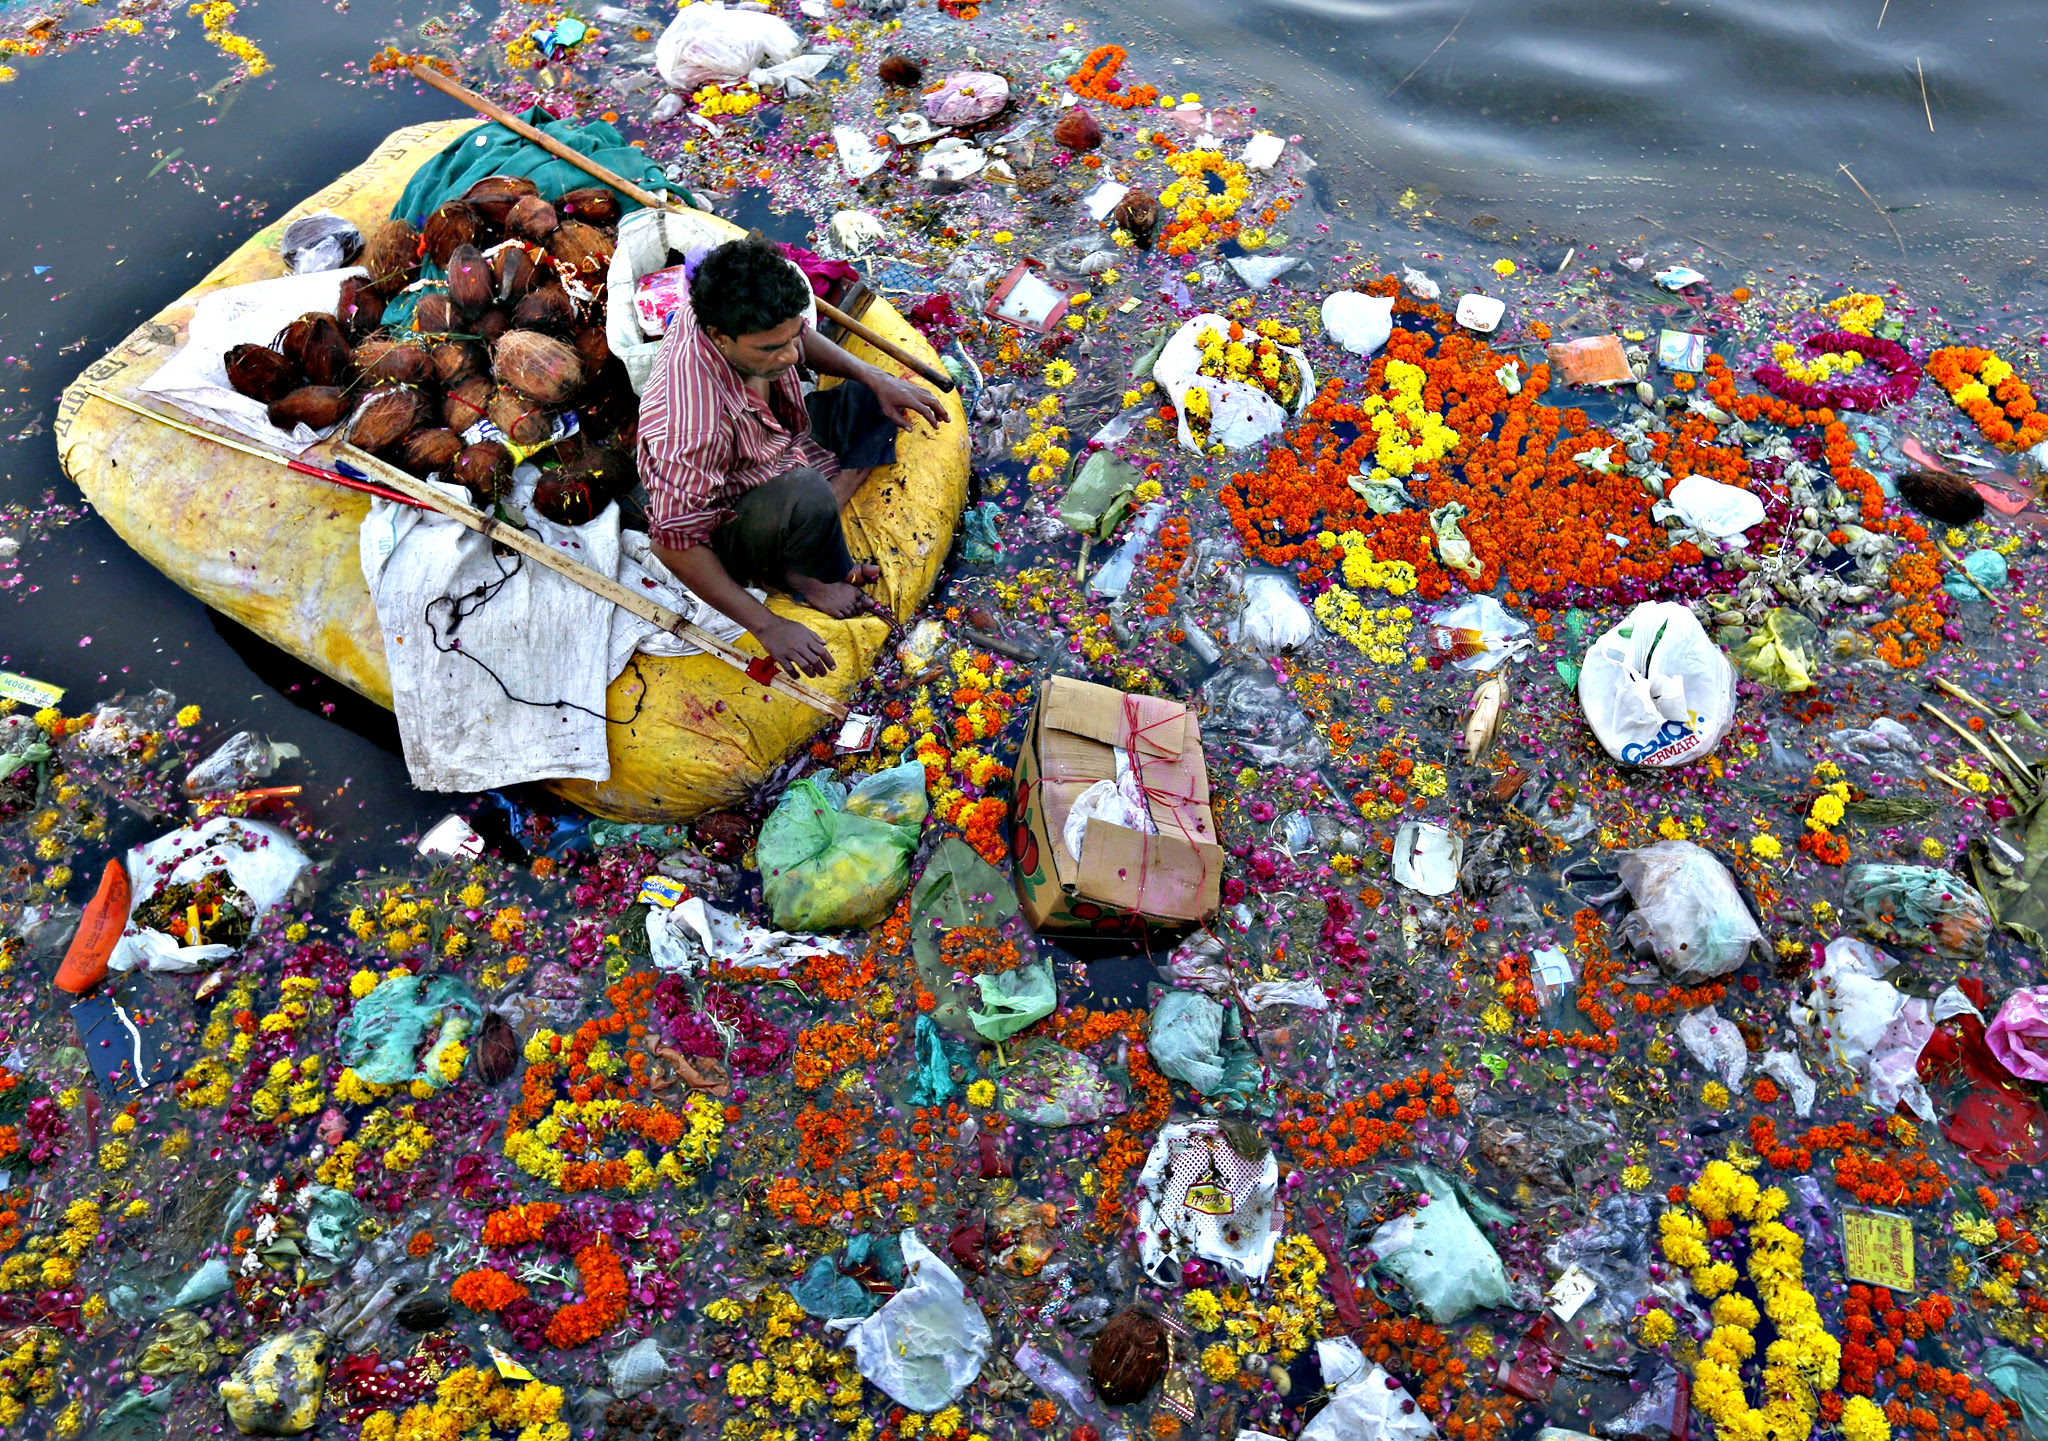 A man collects coconuts and other items thrown as offerings by worshippers in the Sabarmati river, a day after the immersion of idols of the Hindu god Ganesh, the deity of prosperity, in Ahmedabad, India, September 28, 2015. 